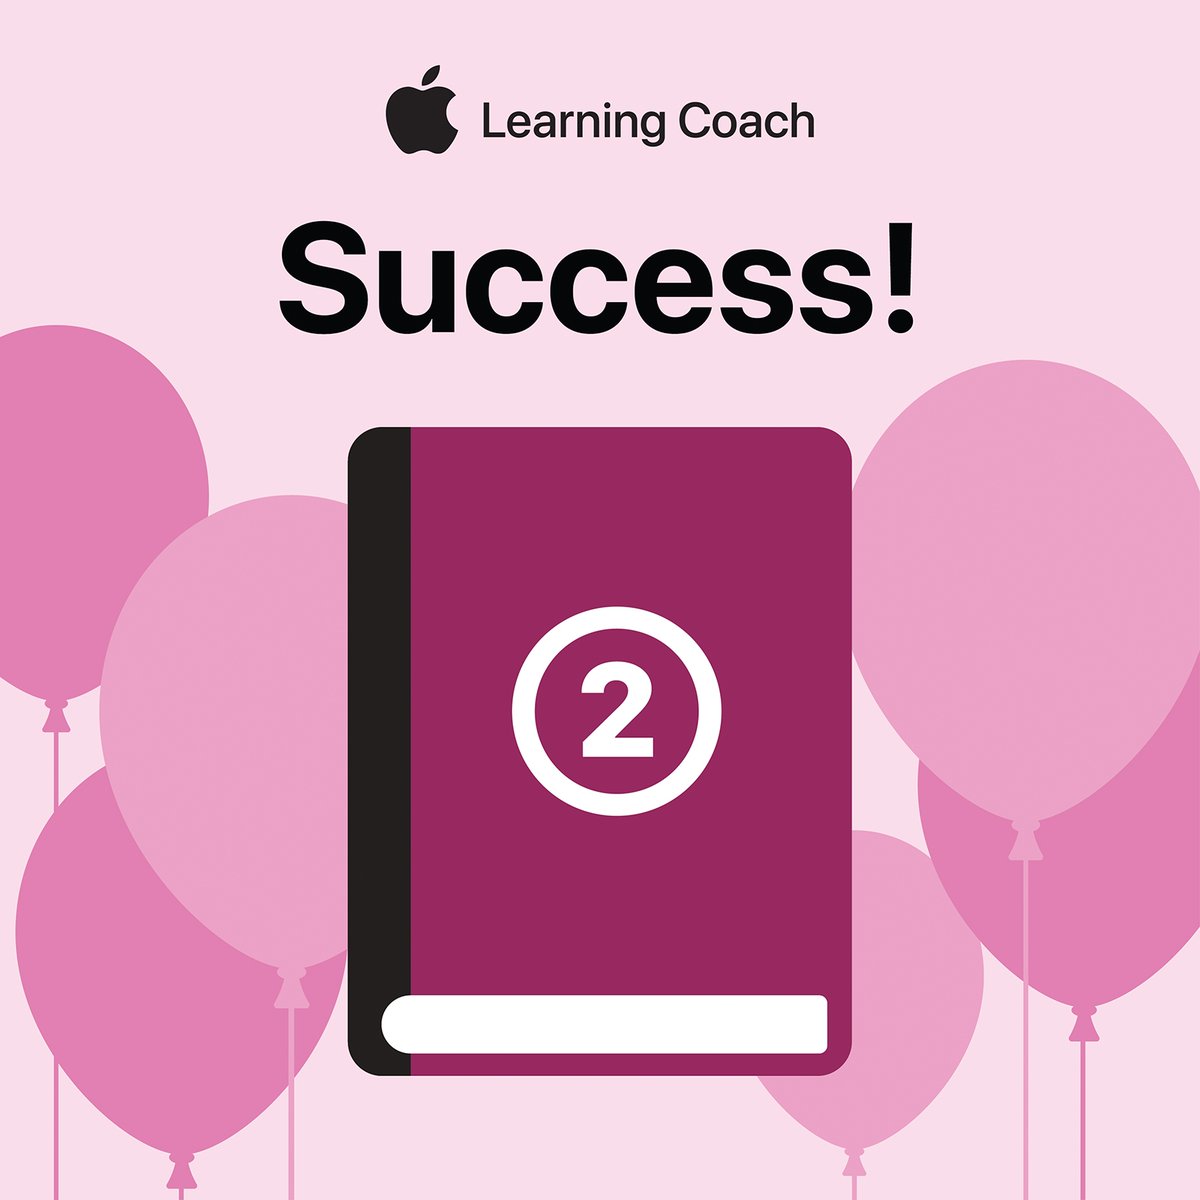 Just completed Unit 2 of Apple Learning Coach certification. Great program! Learning a lot about the Coaching Cycle of Inquire, Plan, Act, Reflect. 🧐#InnovationVanguard #BPSD #BPSDInnovators #OCCUE #Apple